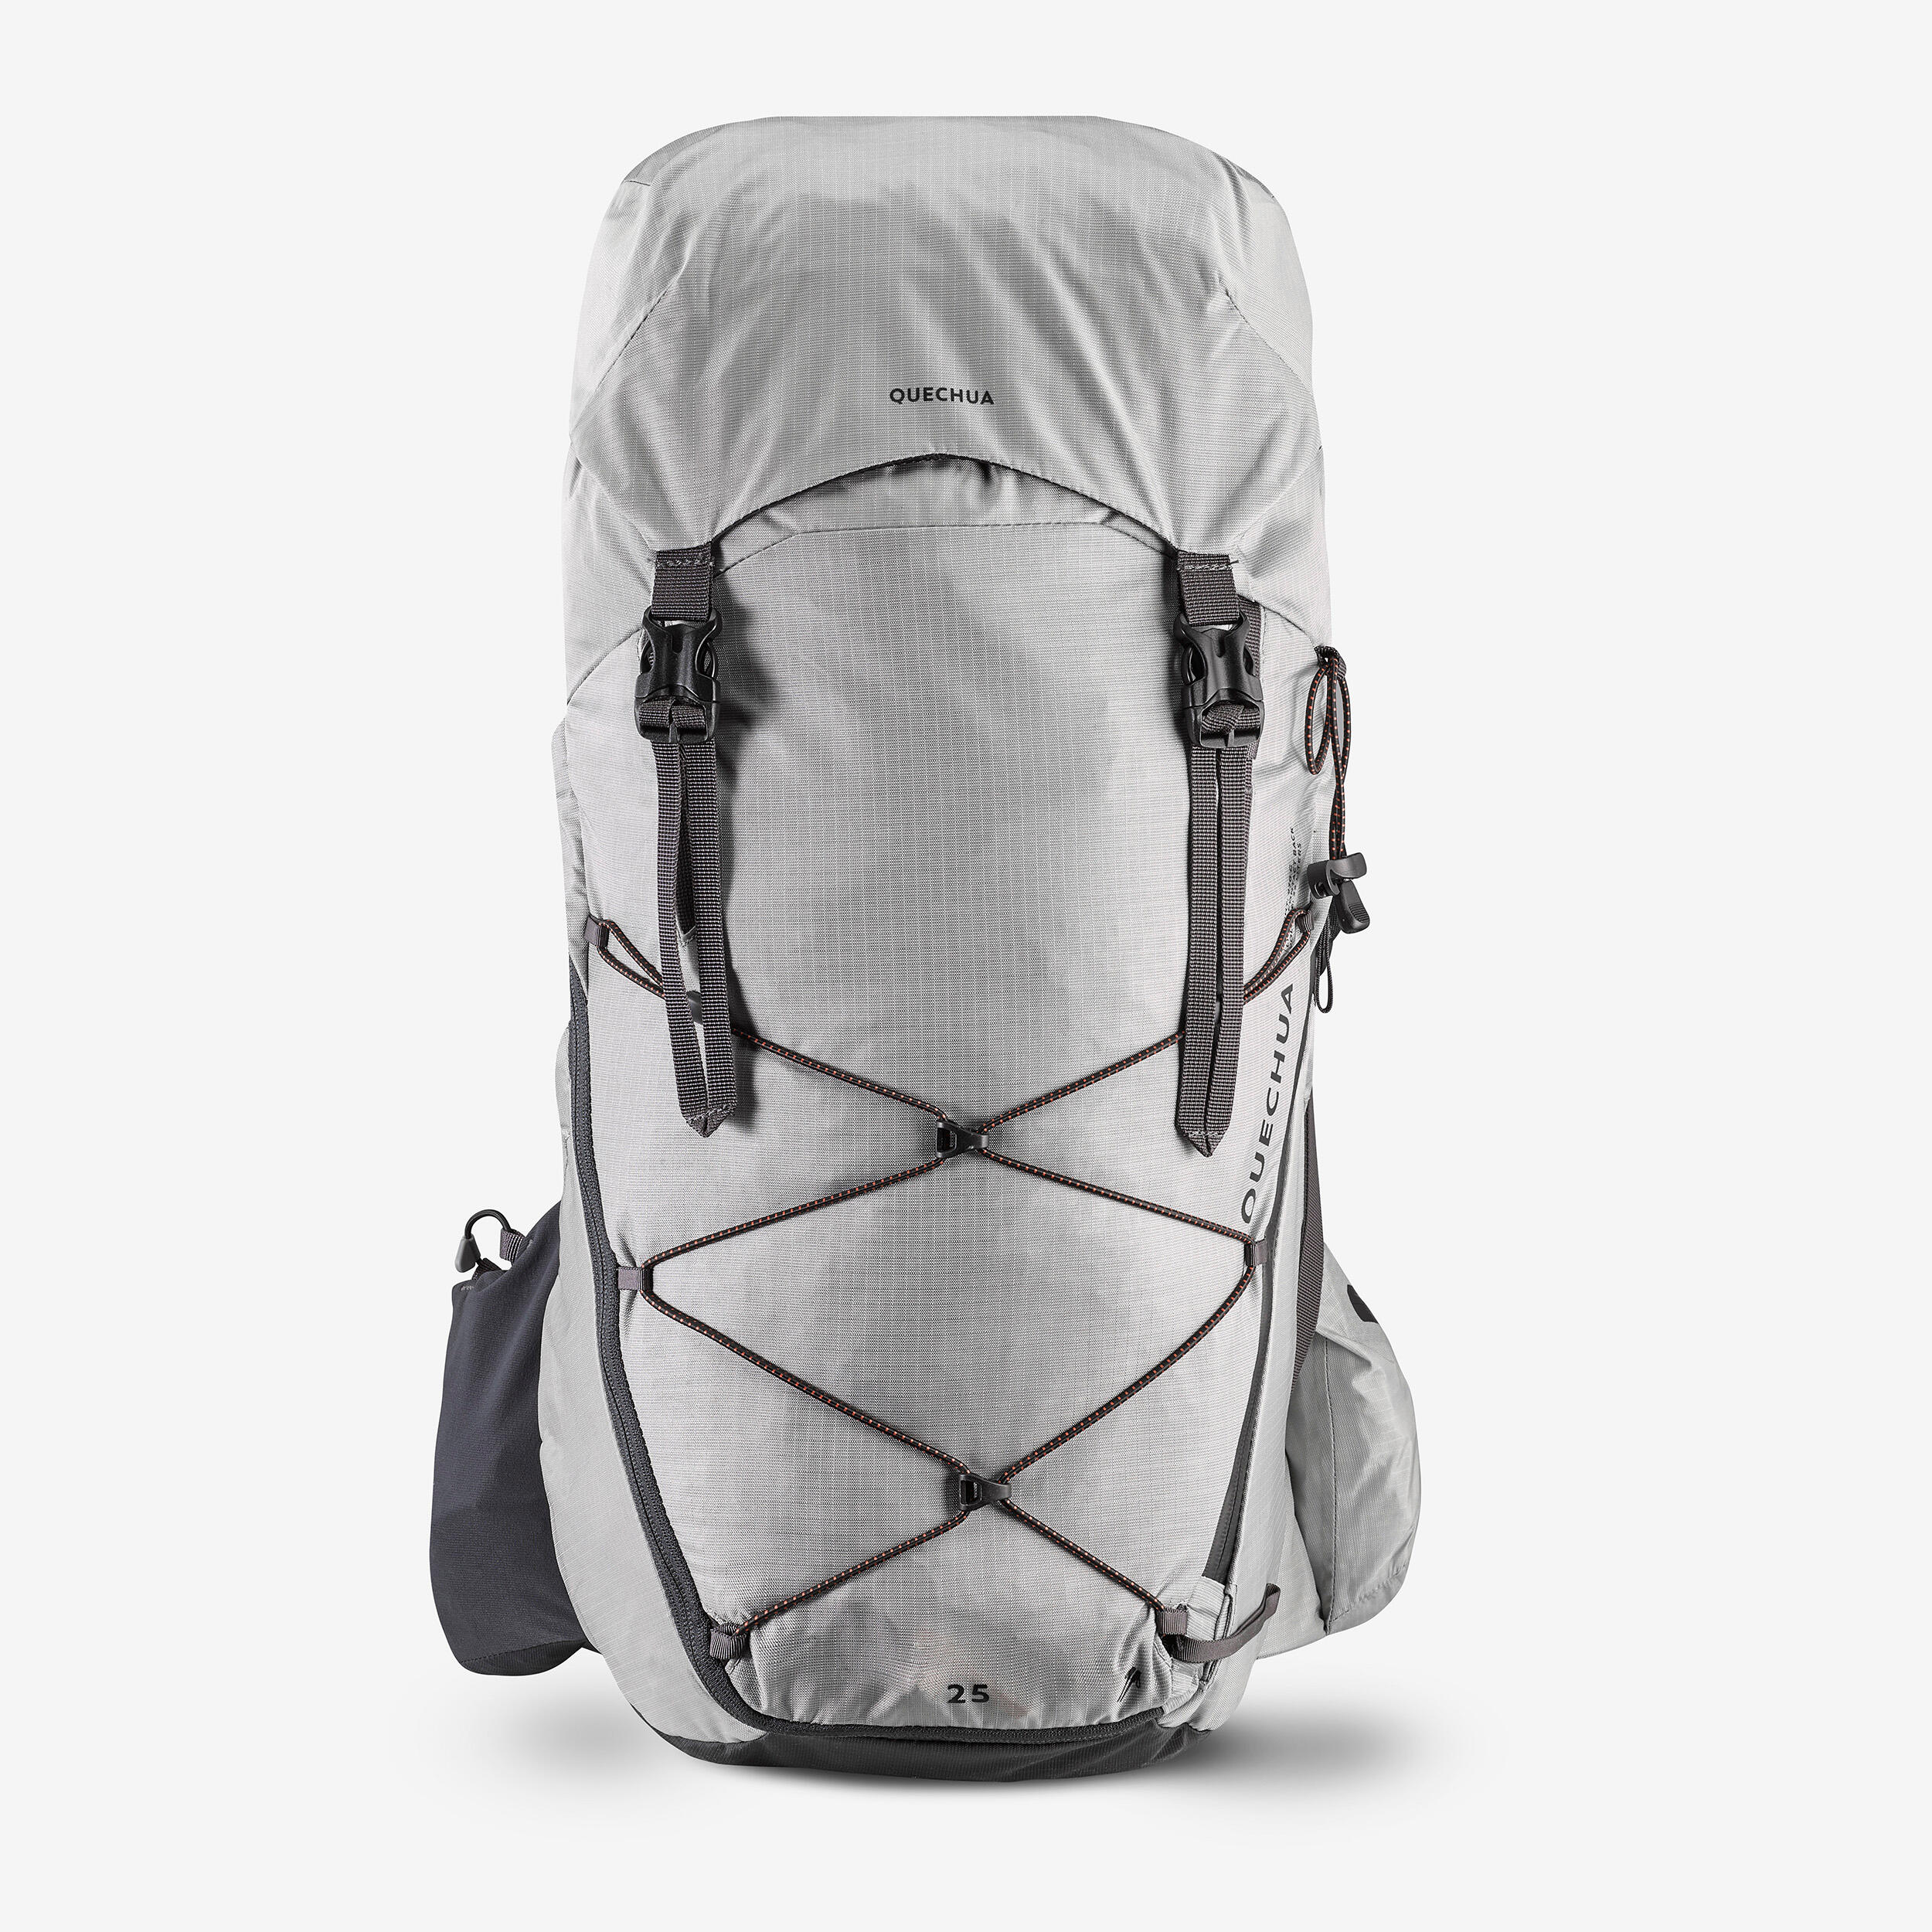 Mountain hiking backpack 25L - MH900 18/18